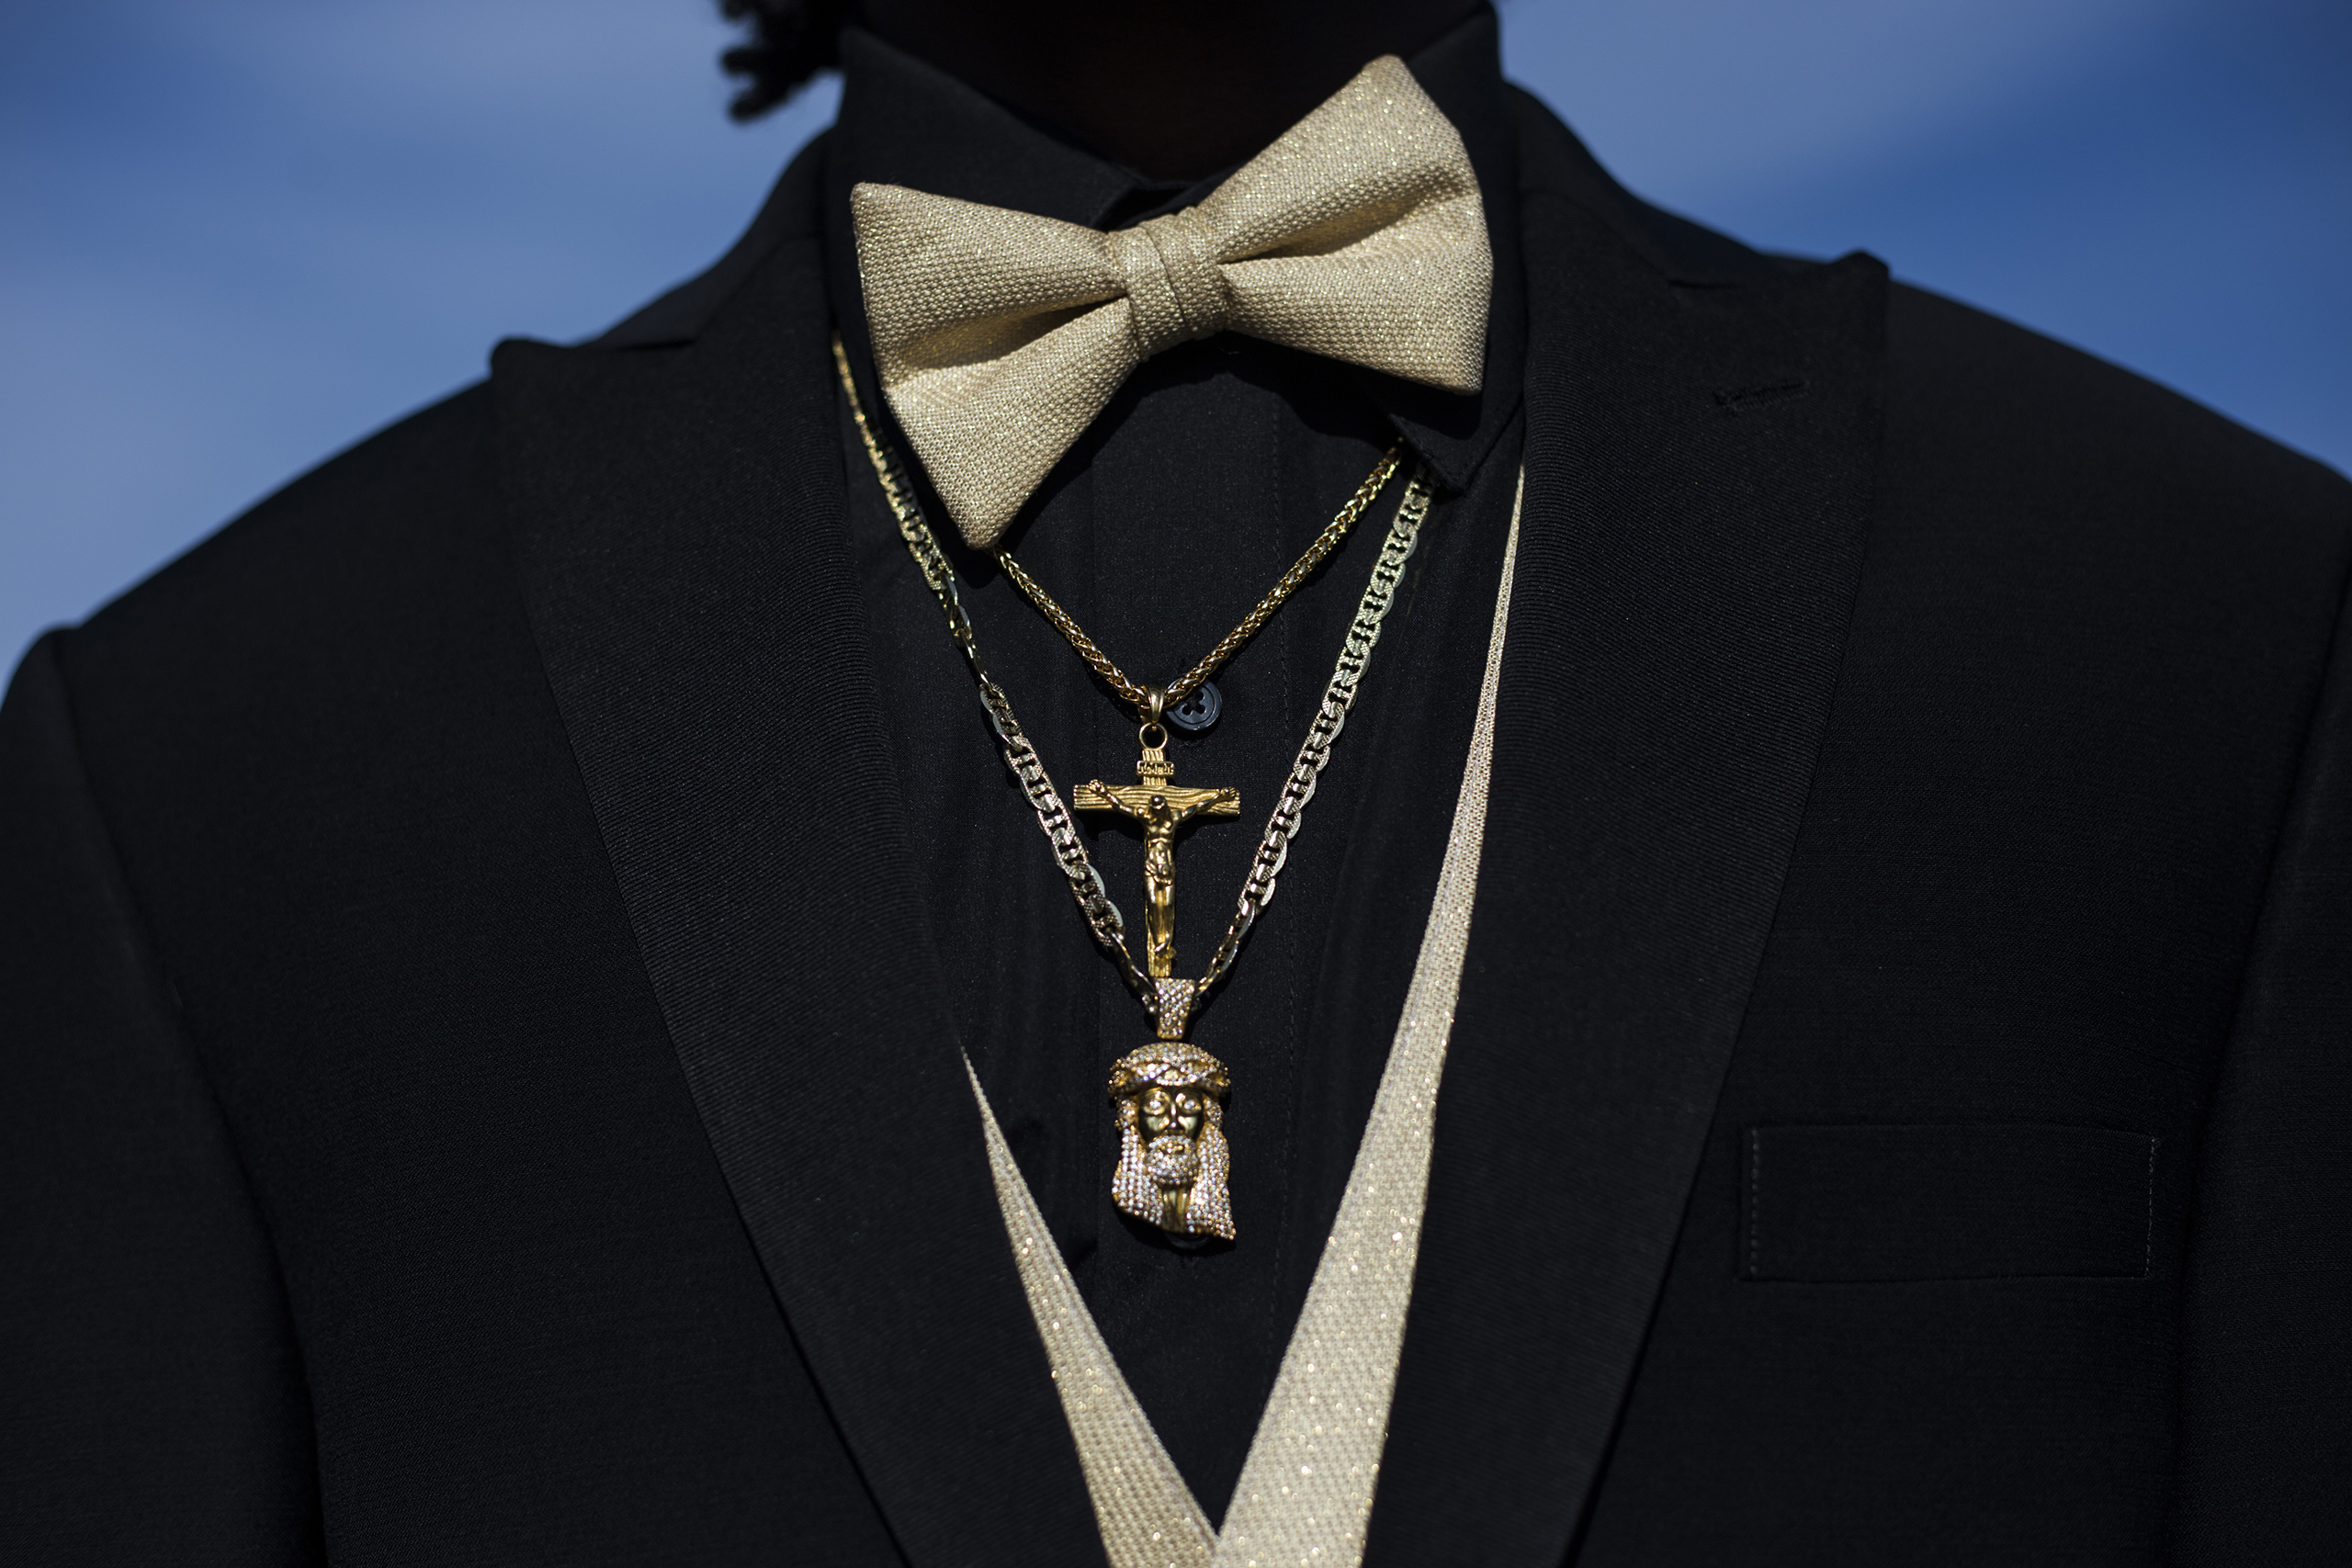 Mattek Scott, 18, sports a gold cross and Jesus pendant during a pre-prom red carpet-style event outside Northwestern High School in Flint, Mich., May 21, 2016.